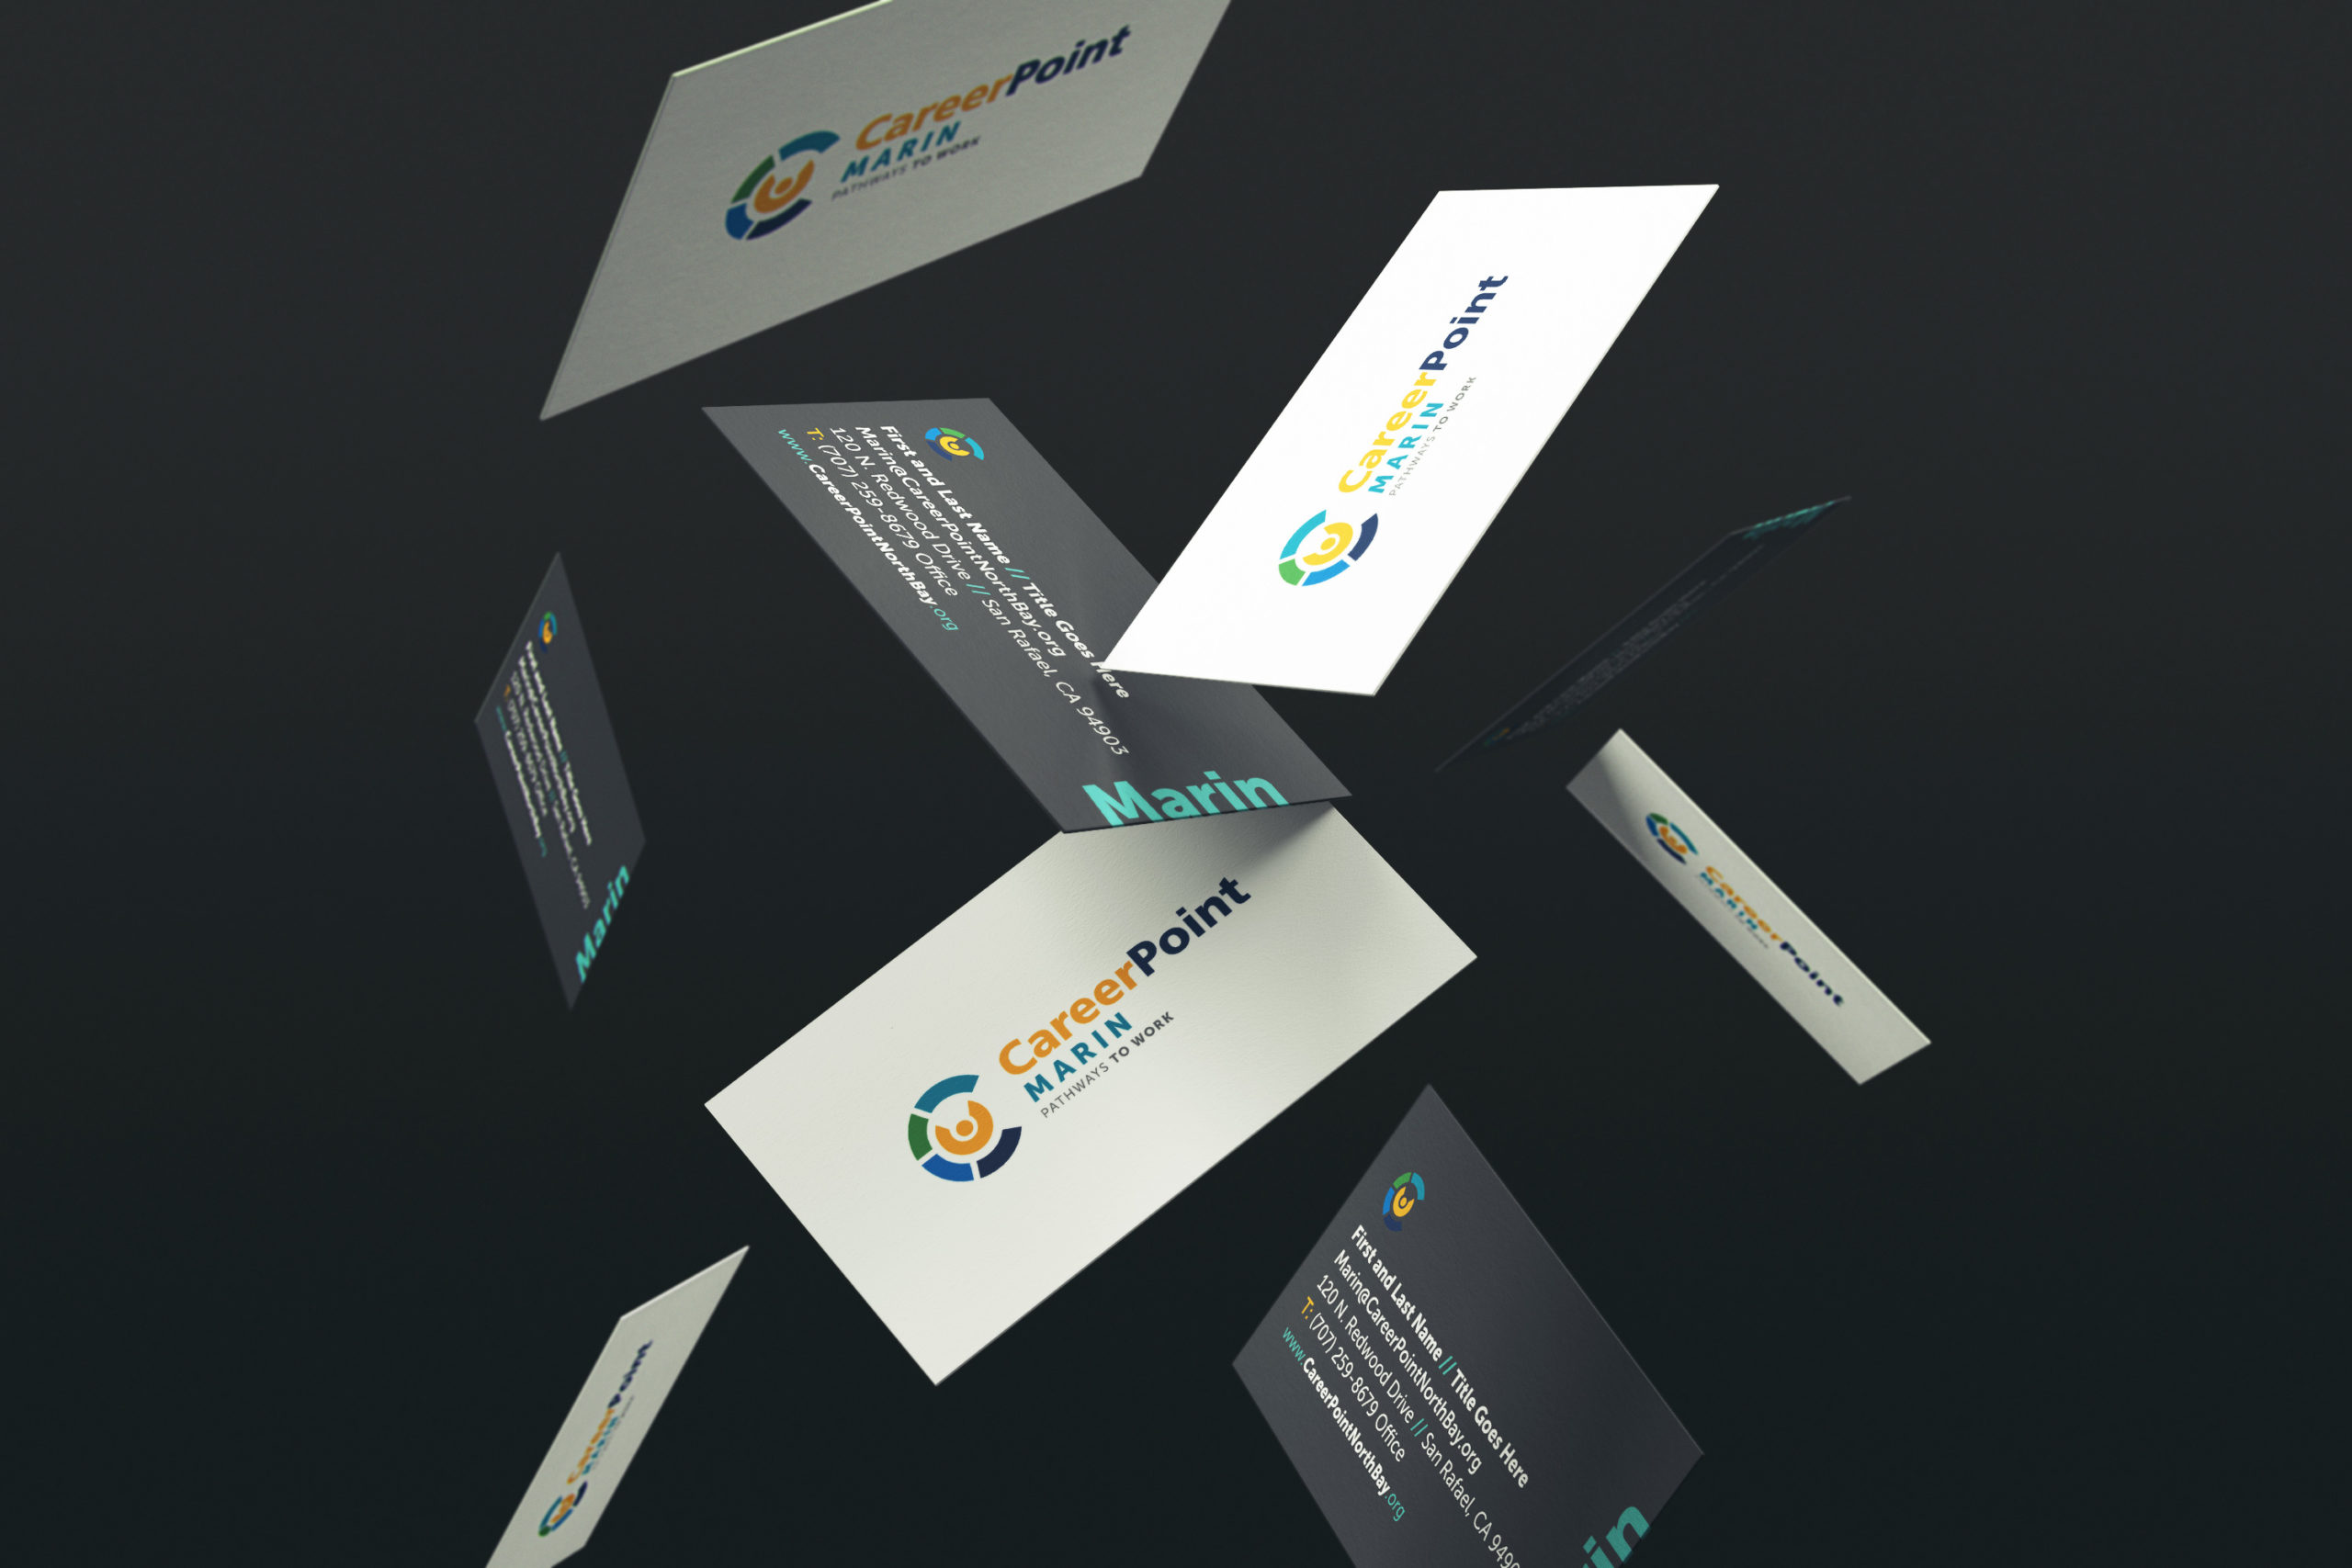 This is FCM portfolio for Falling business cards mockup